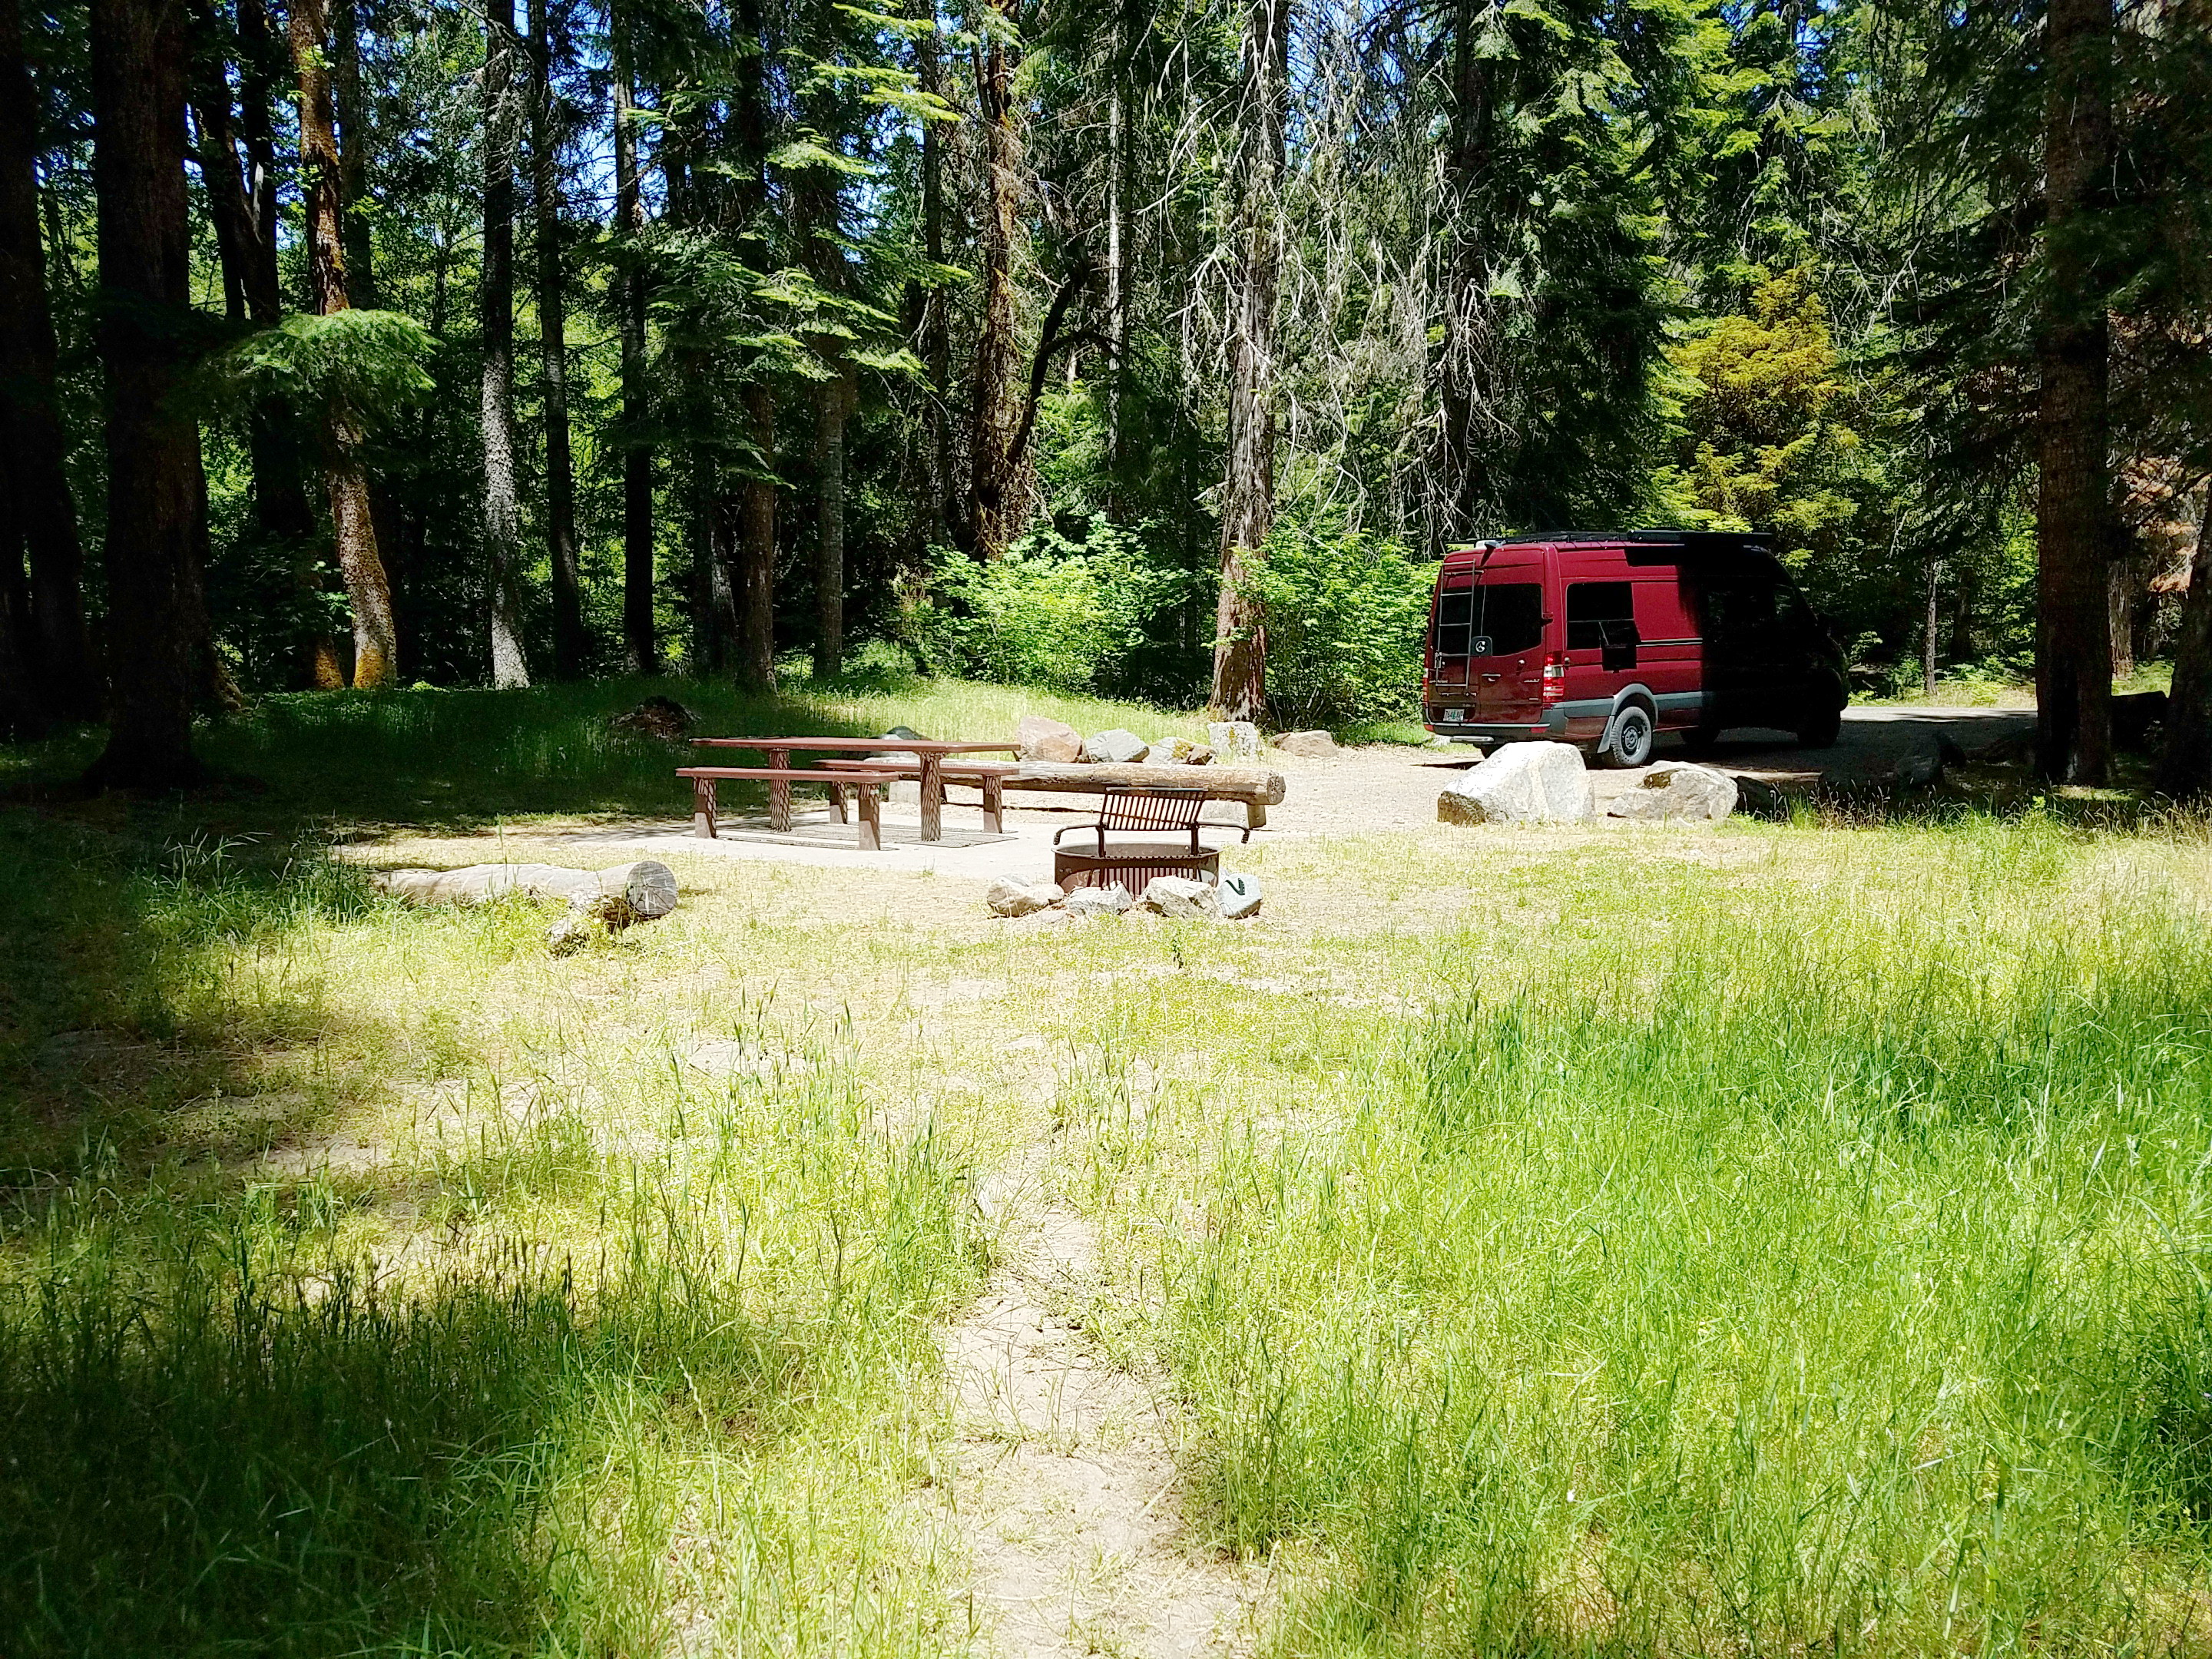 View of campsite at Elderberry Flat Campground.